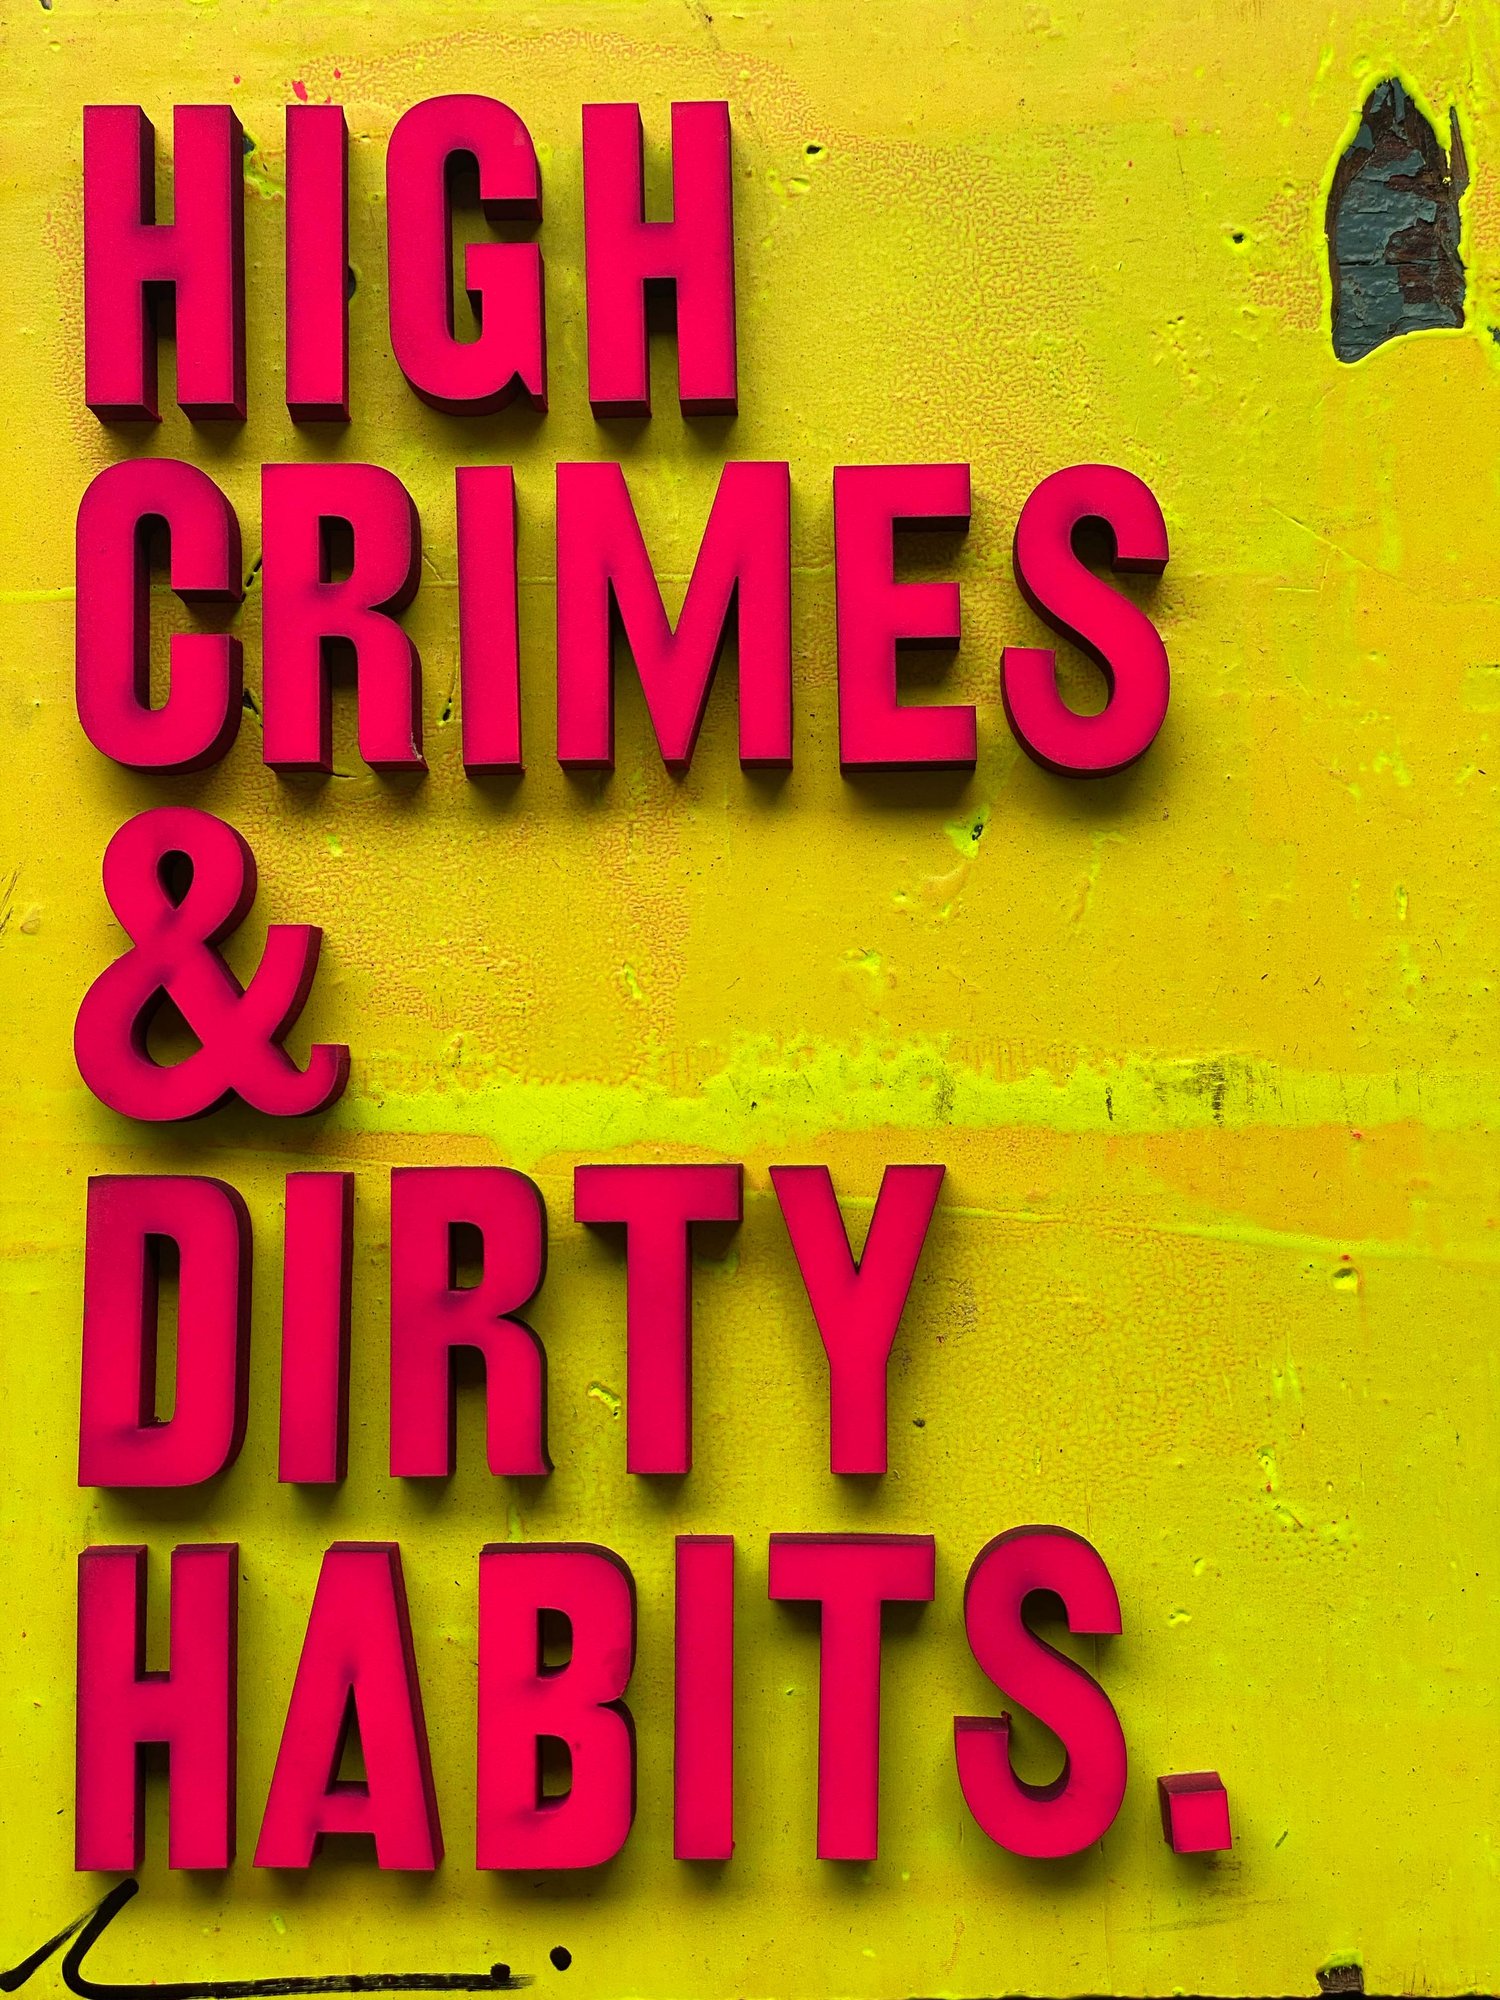 Image of 'High crimes and dirty habits.' by Hackney Dave